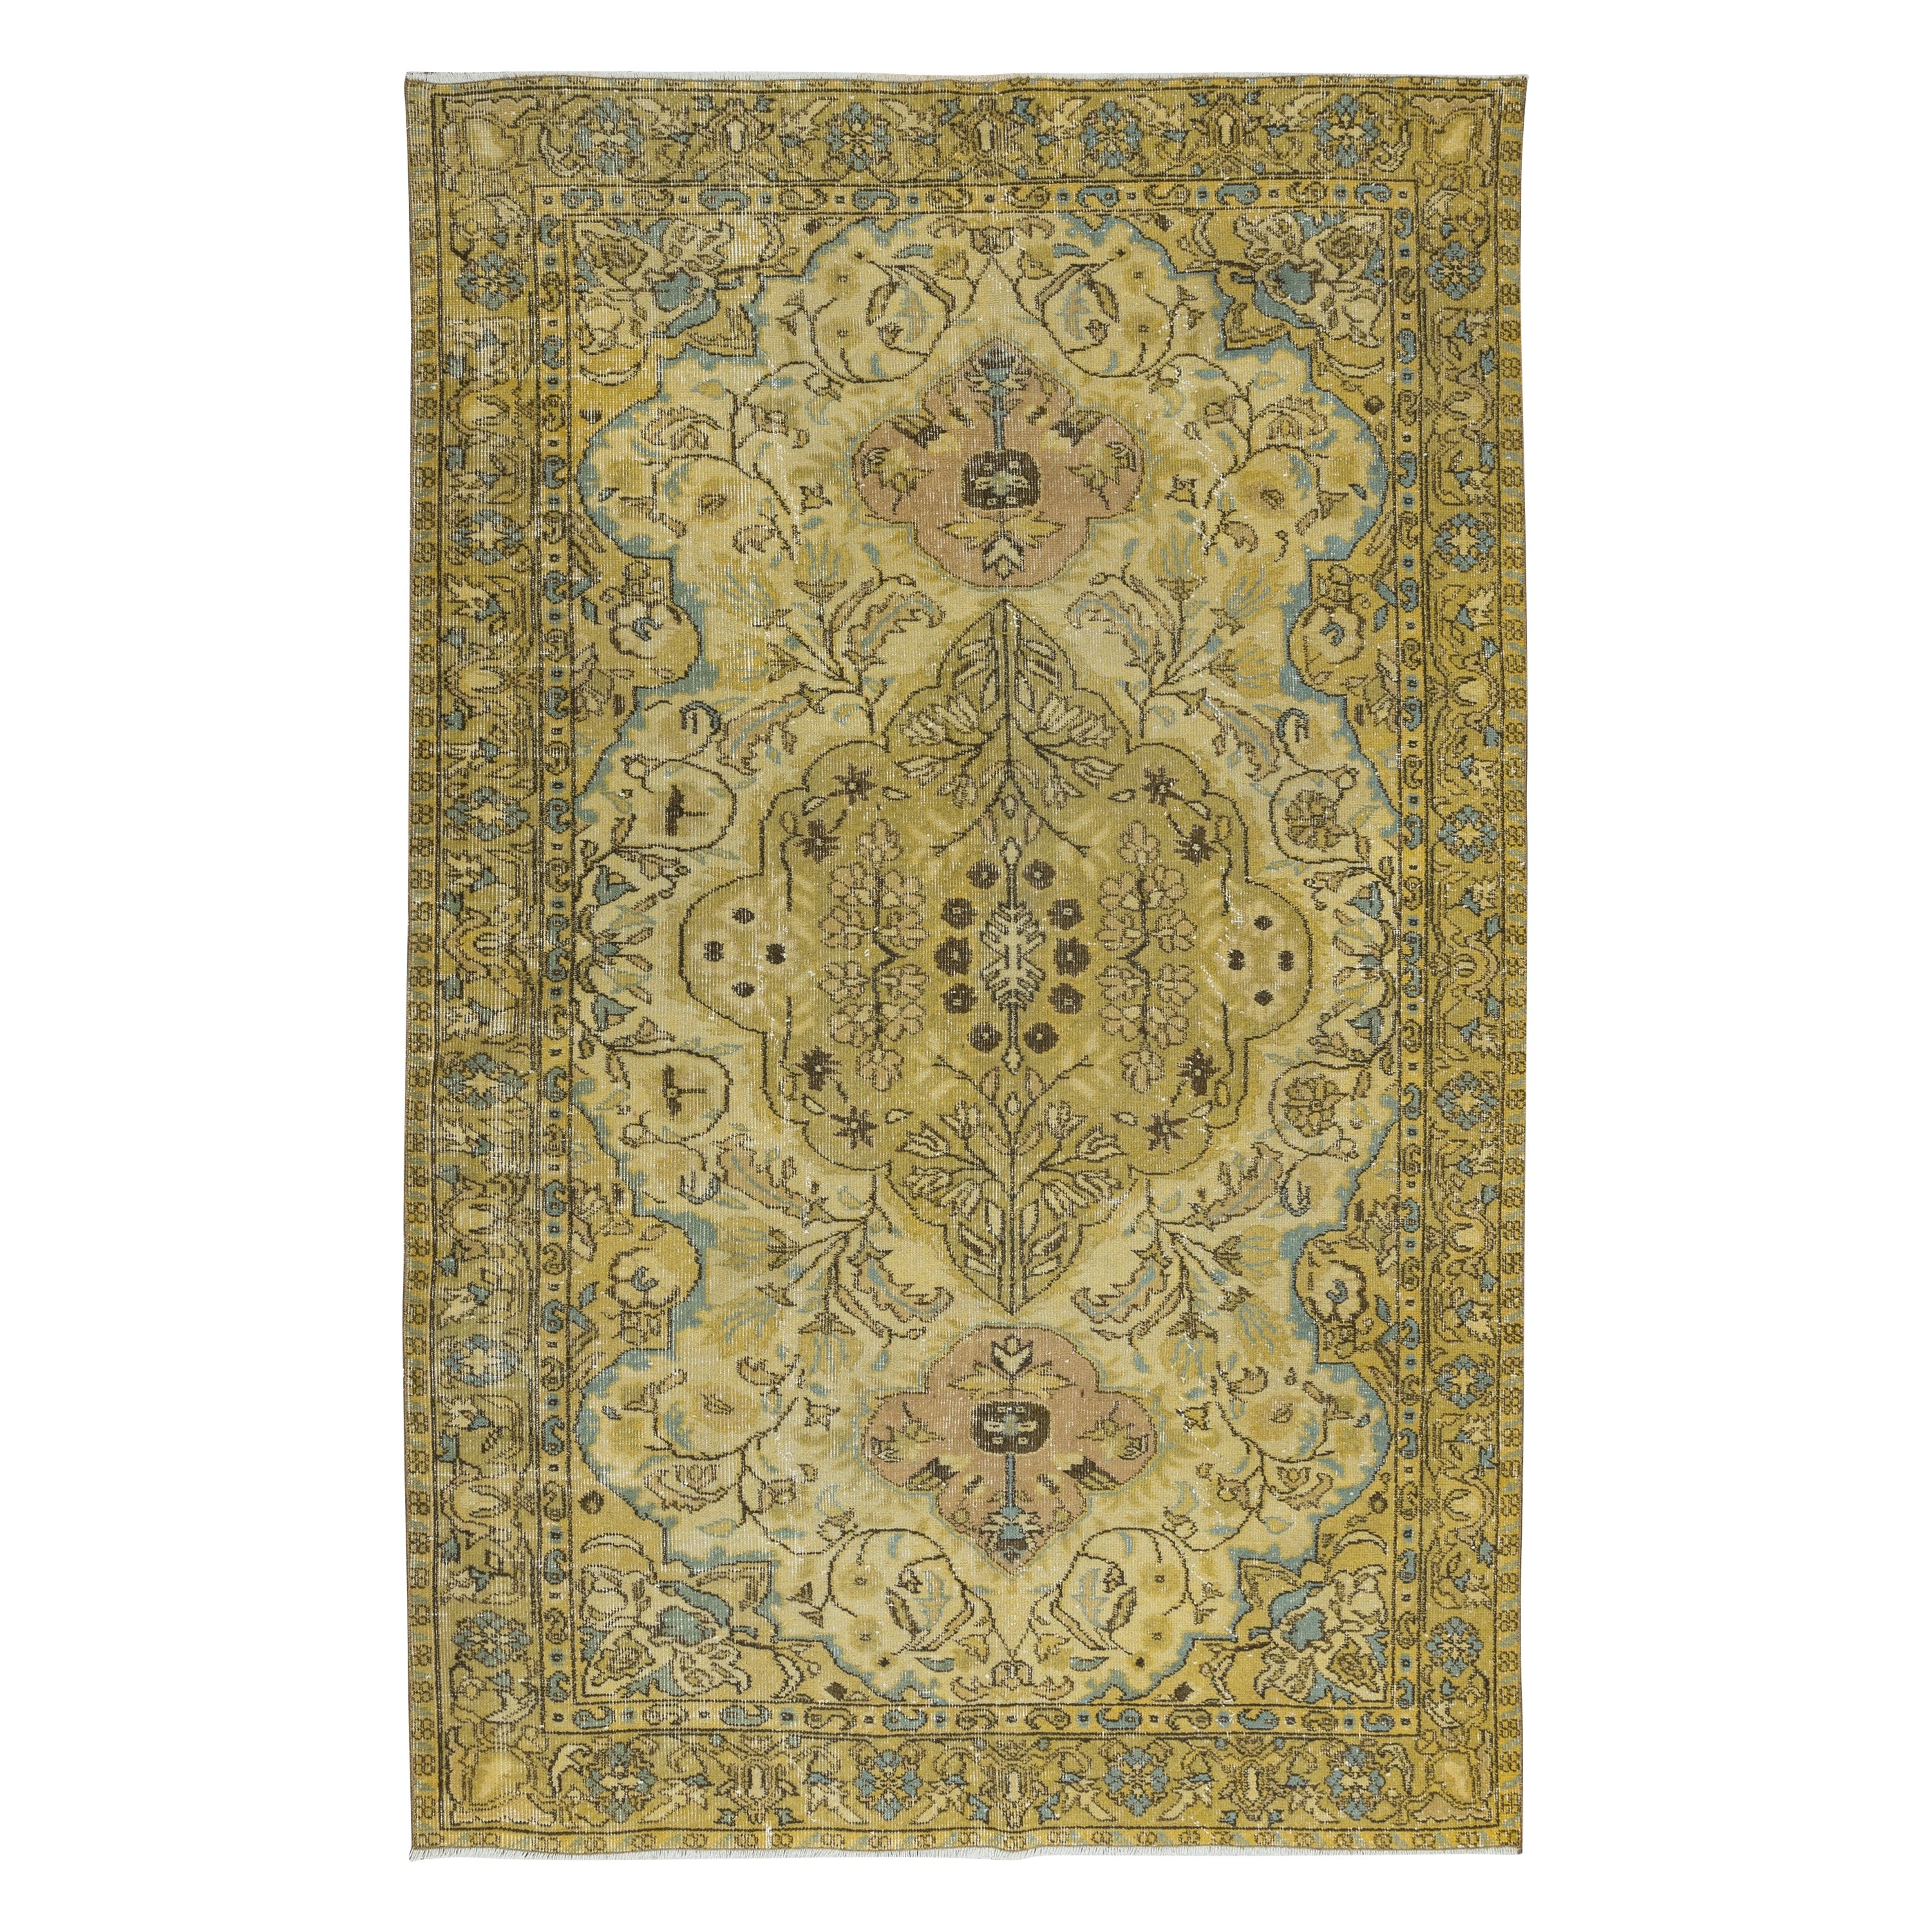 5.6x8.8 Ft Exquisite Yellow Turkish Area Rug, Modern Floral Handmade Carpet For Sale